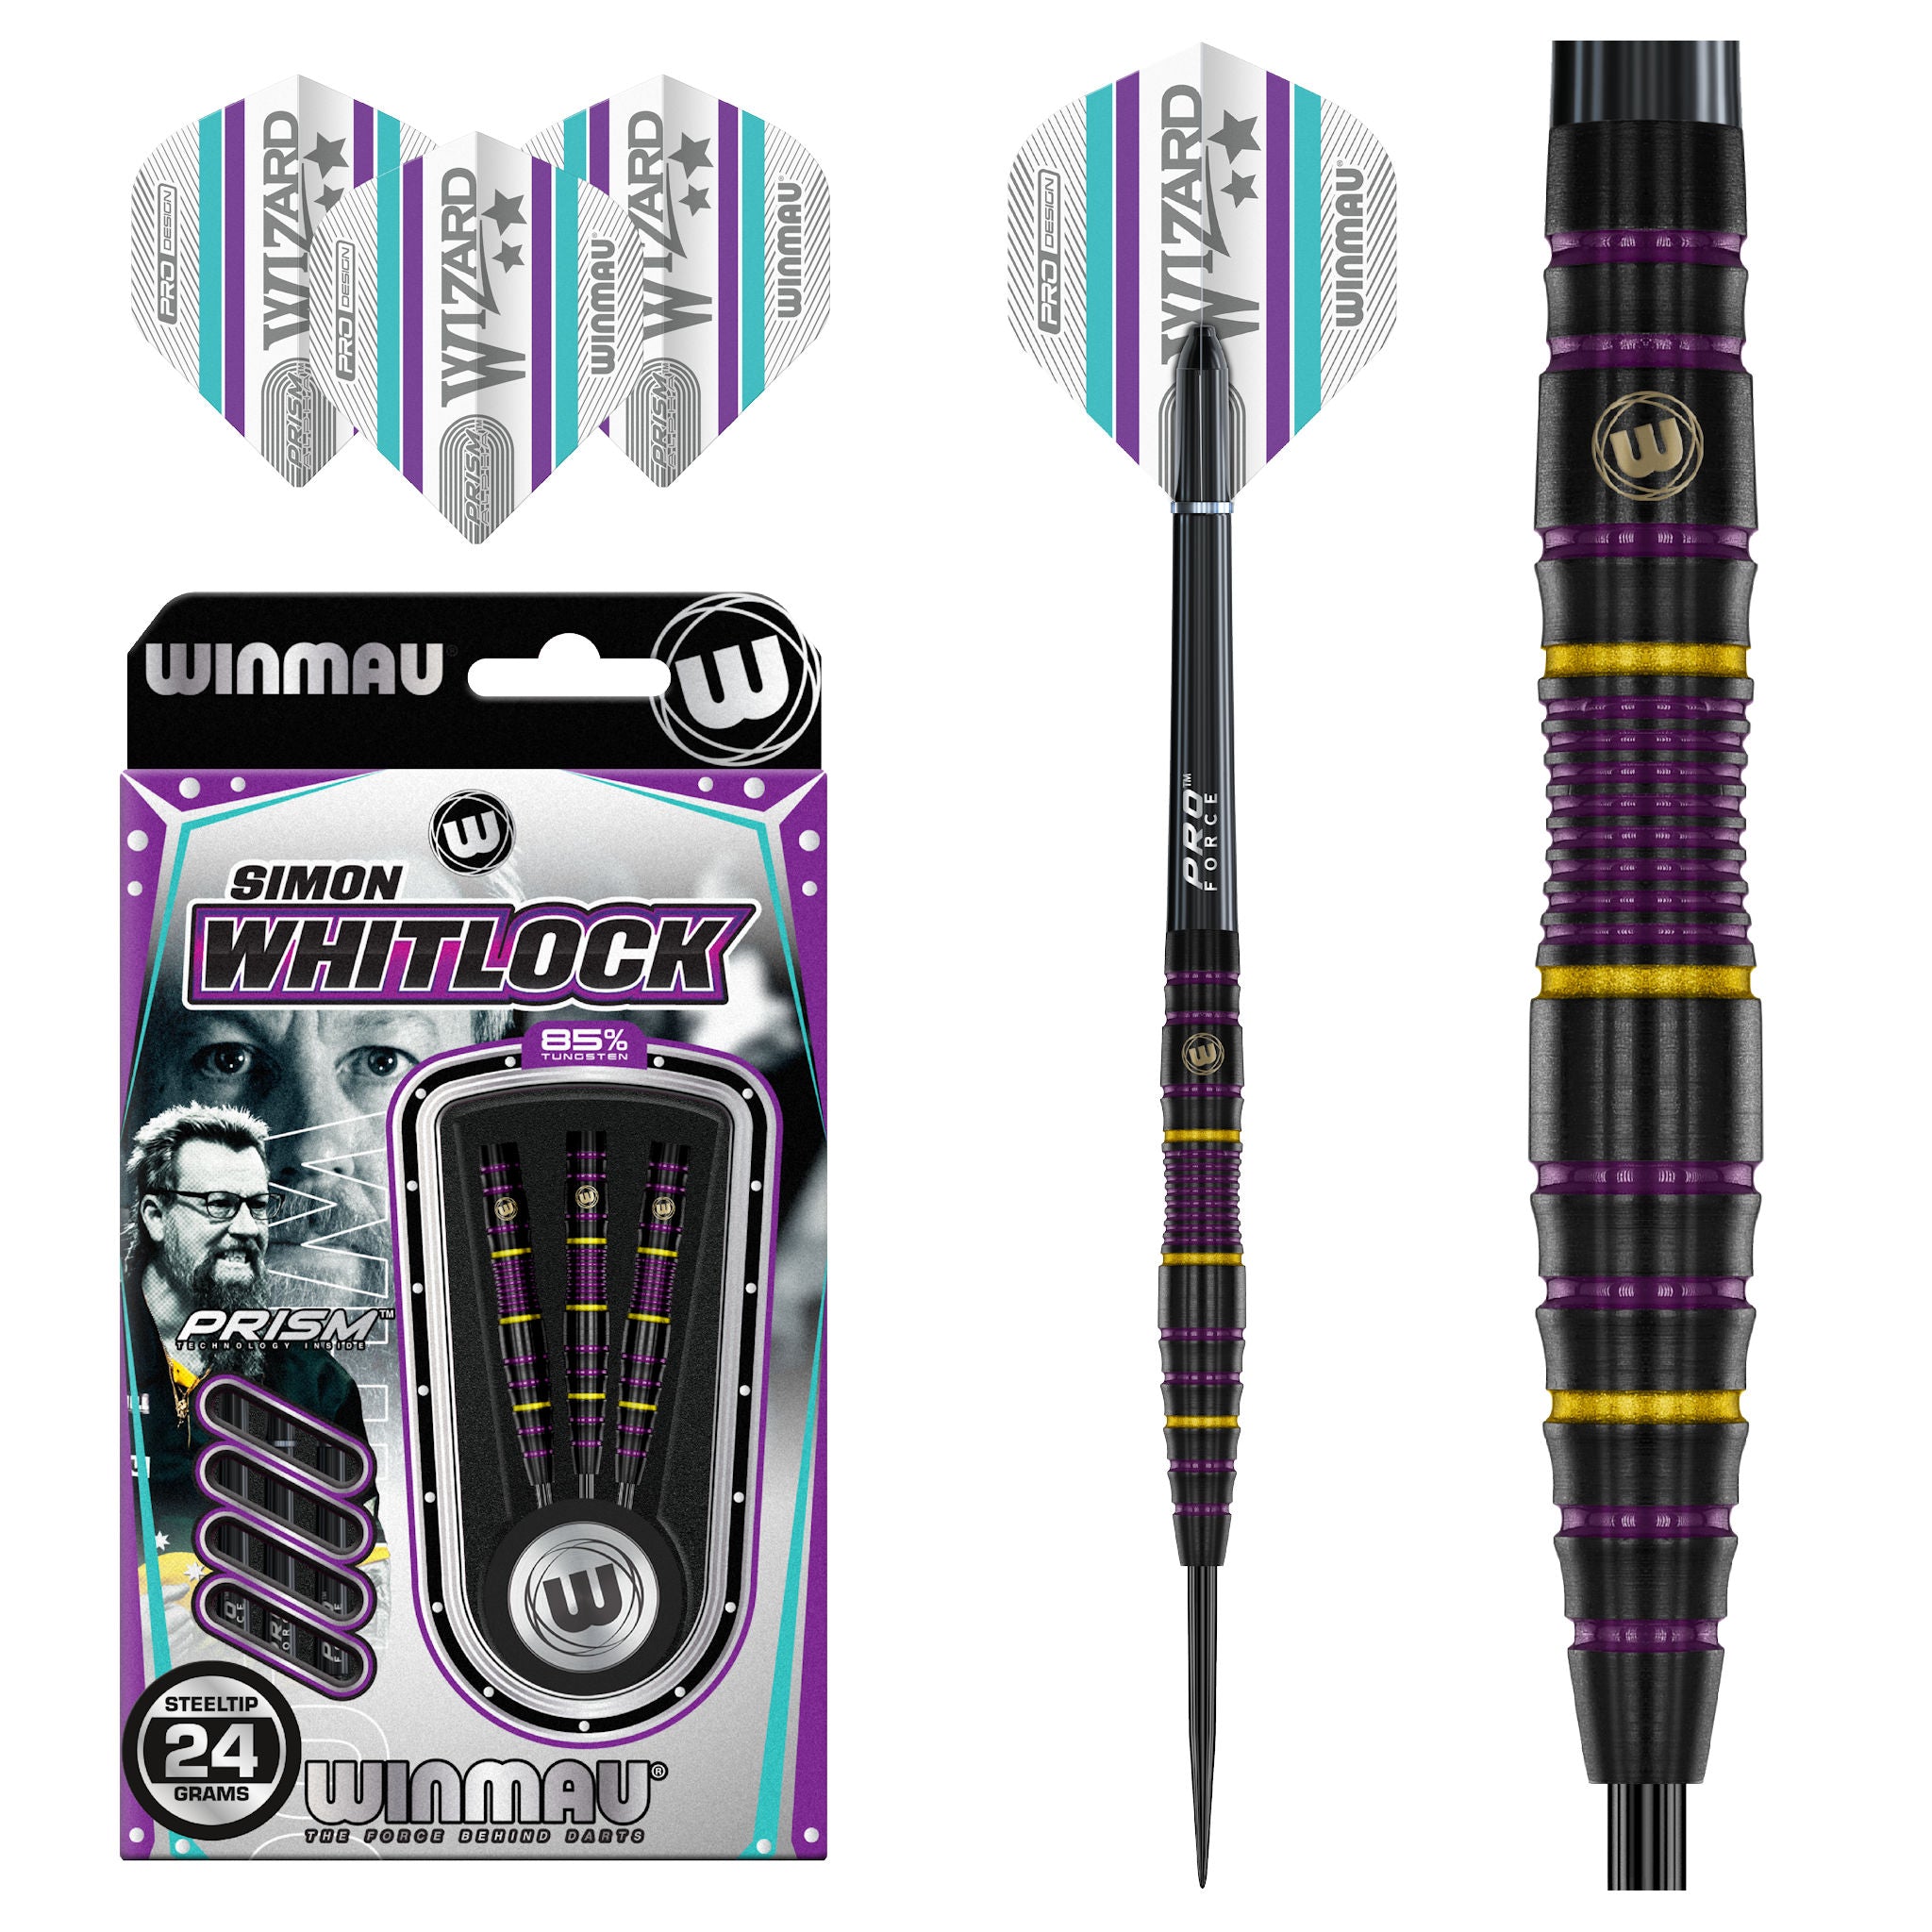 Simon Whitlock 85% Tungsten what's in the box